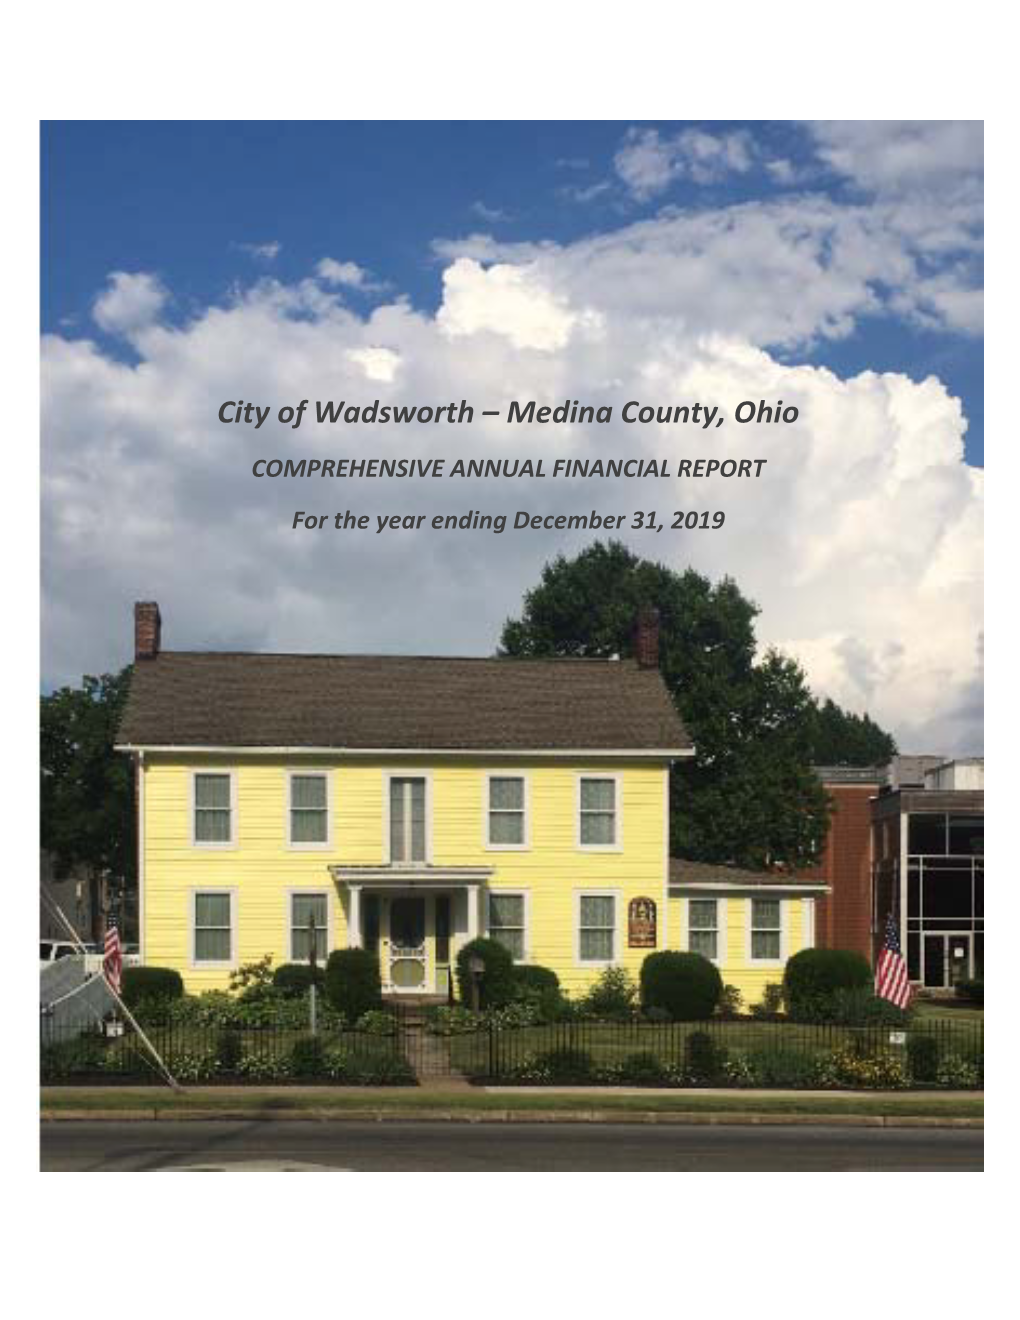 Medina County, Ohio COMPREHENSIVE ANNUAL FINANCIAL REPORT for the Year Ending December 31, 2019